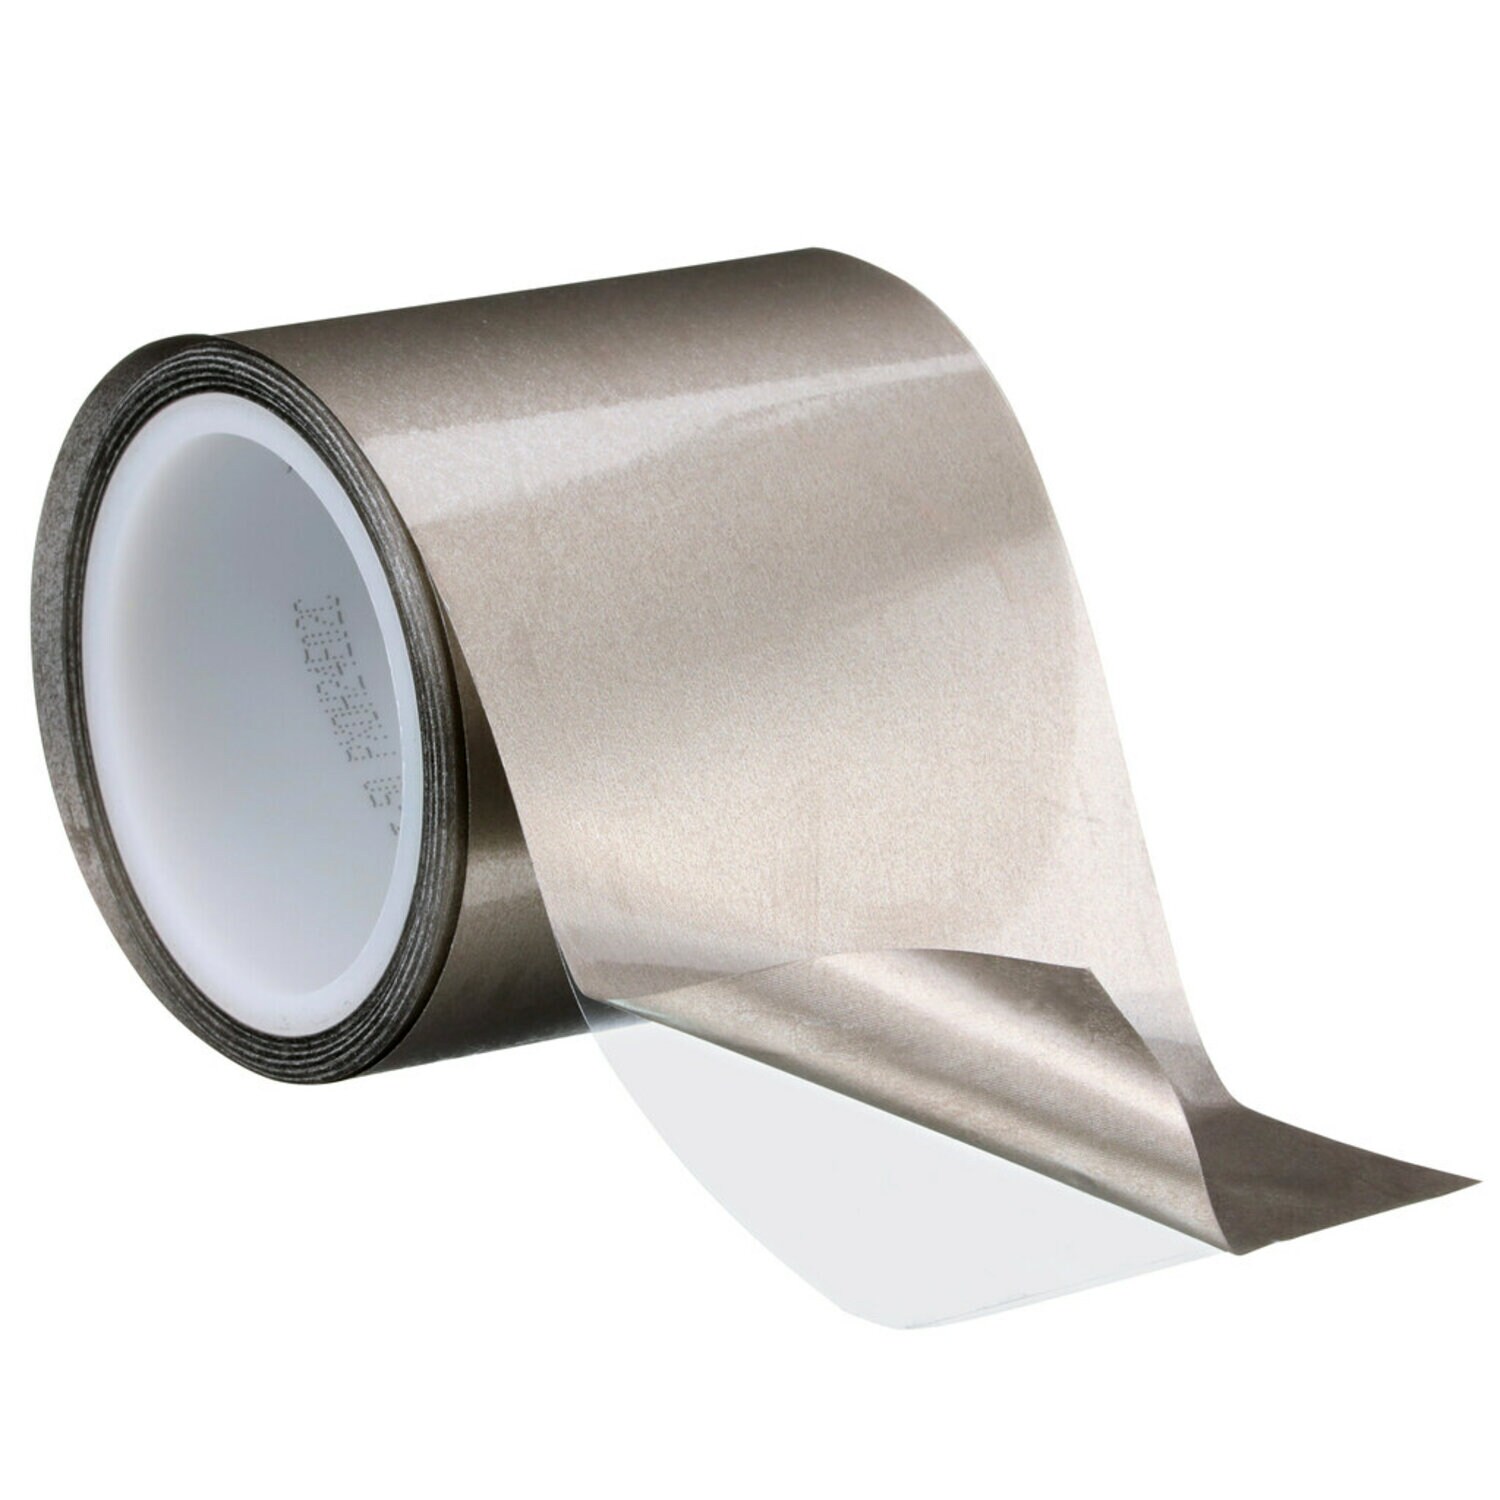 7100313736 - 3M Electrically Conductive Double-Sided Tape 5113DFT-50, 1080 mm x 60 m, 1 Roll/Case, Untrimmed